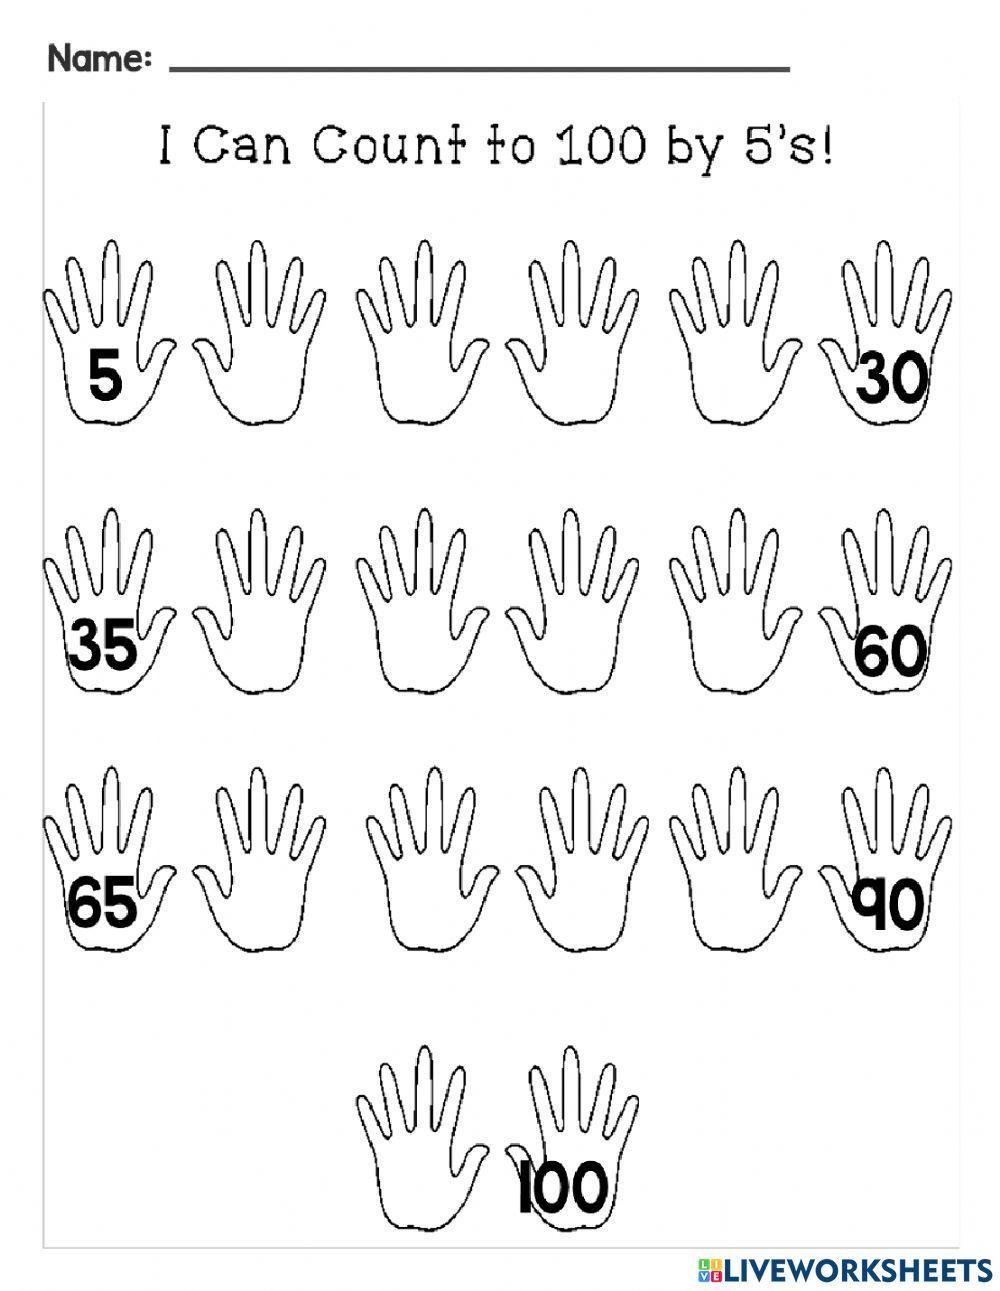 Count by 5s (Handprint 3)